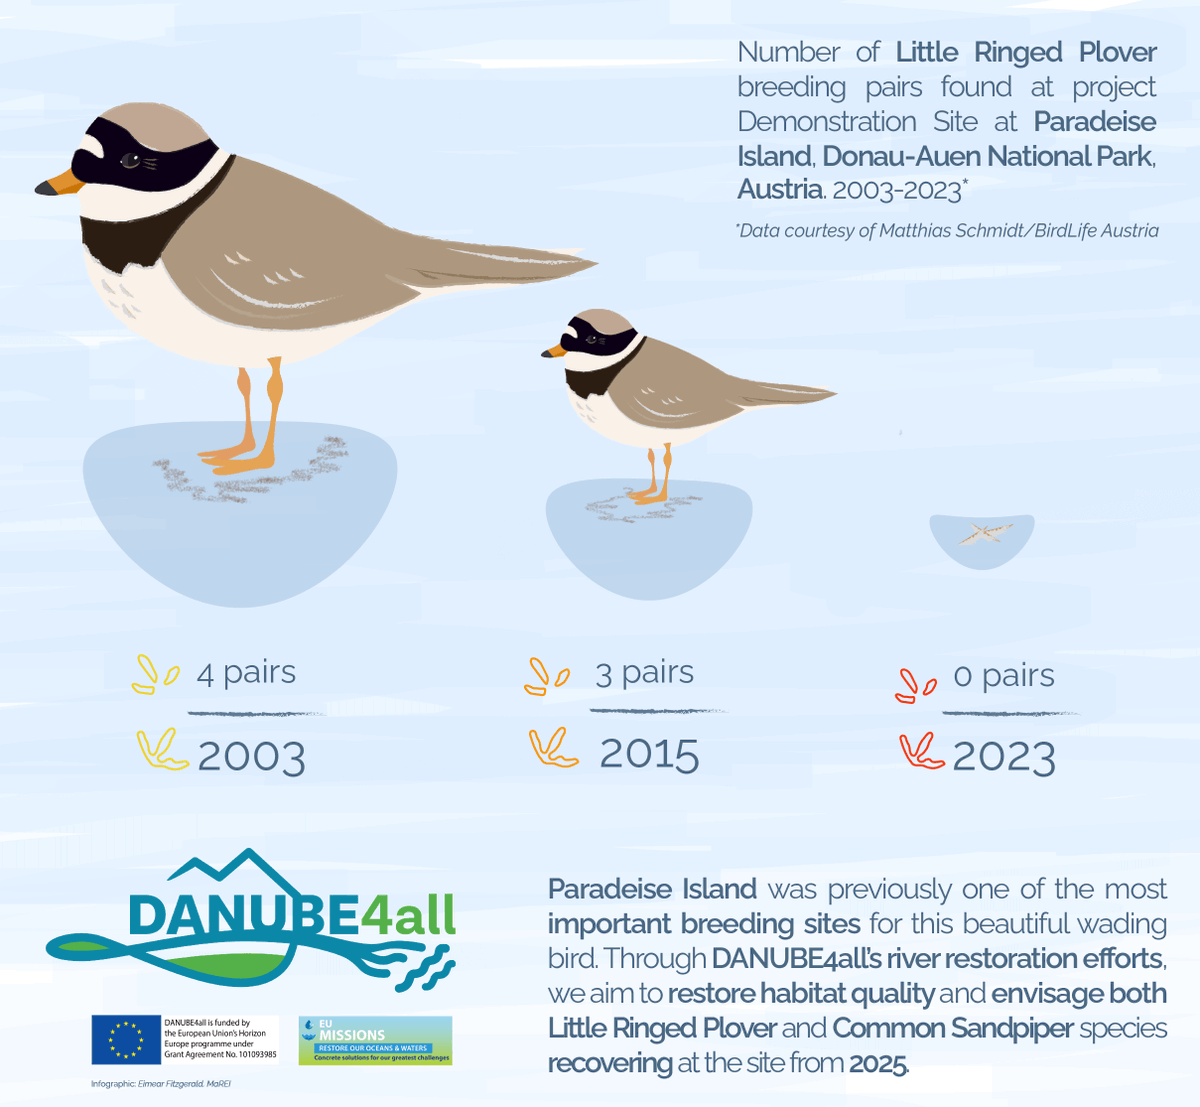 😢Data from @BirdLifeAustria & our partners at DANUBEPARKS shows an absence of breeding pairs of Little Ringed Plover from our project site in Donau-Auen National Park this year 🥰 Read how #Danube4all efforts will work to restore this important habitat💙👉wix.to/DXN8ZVK